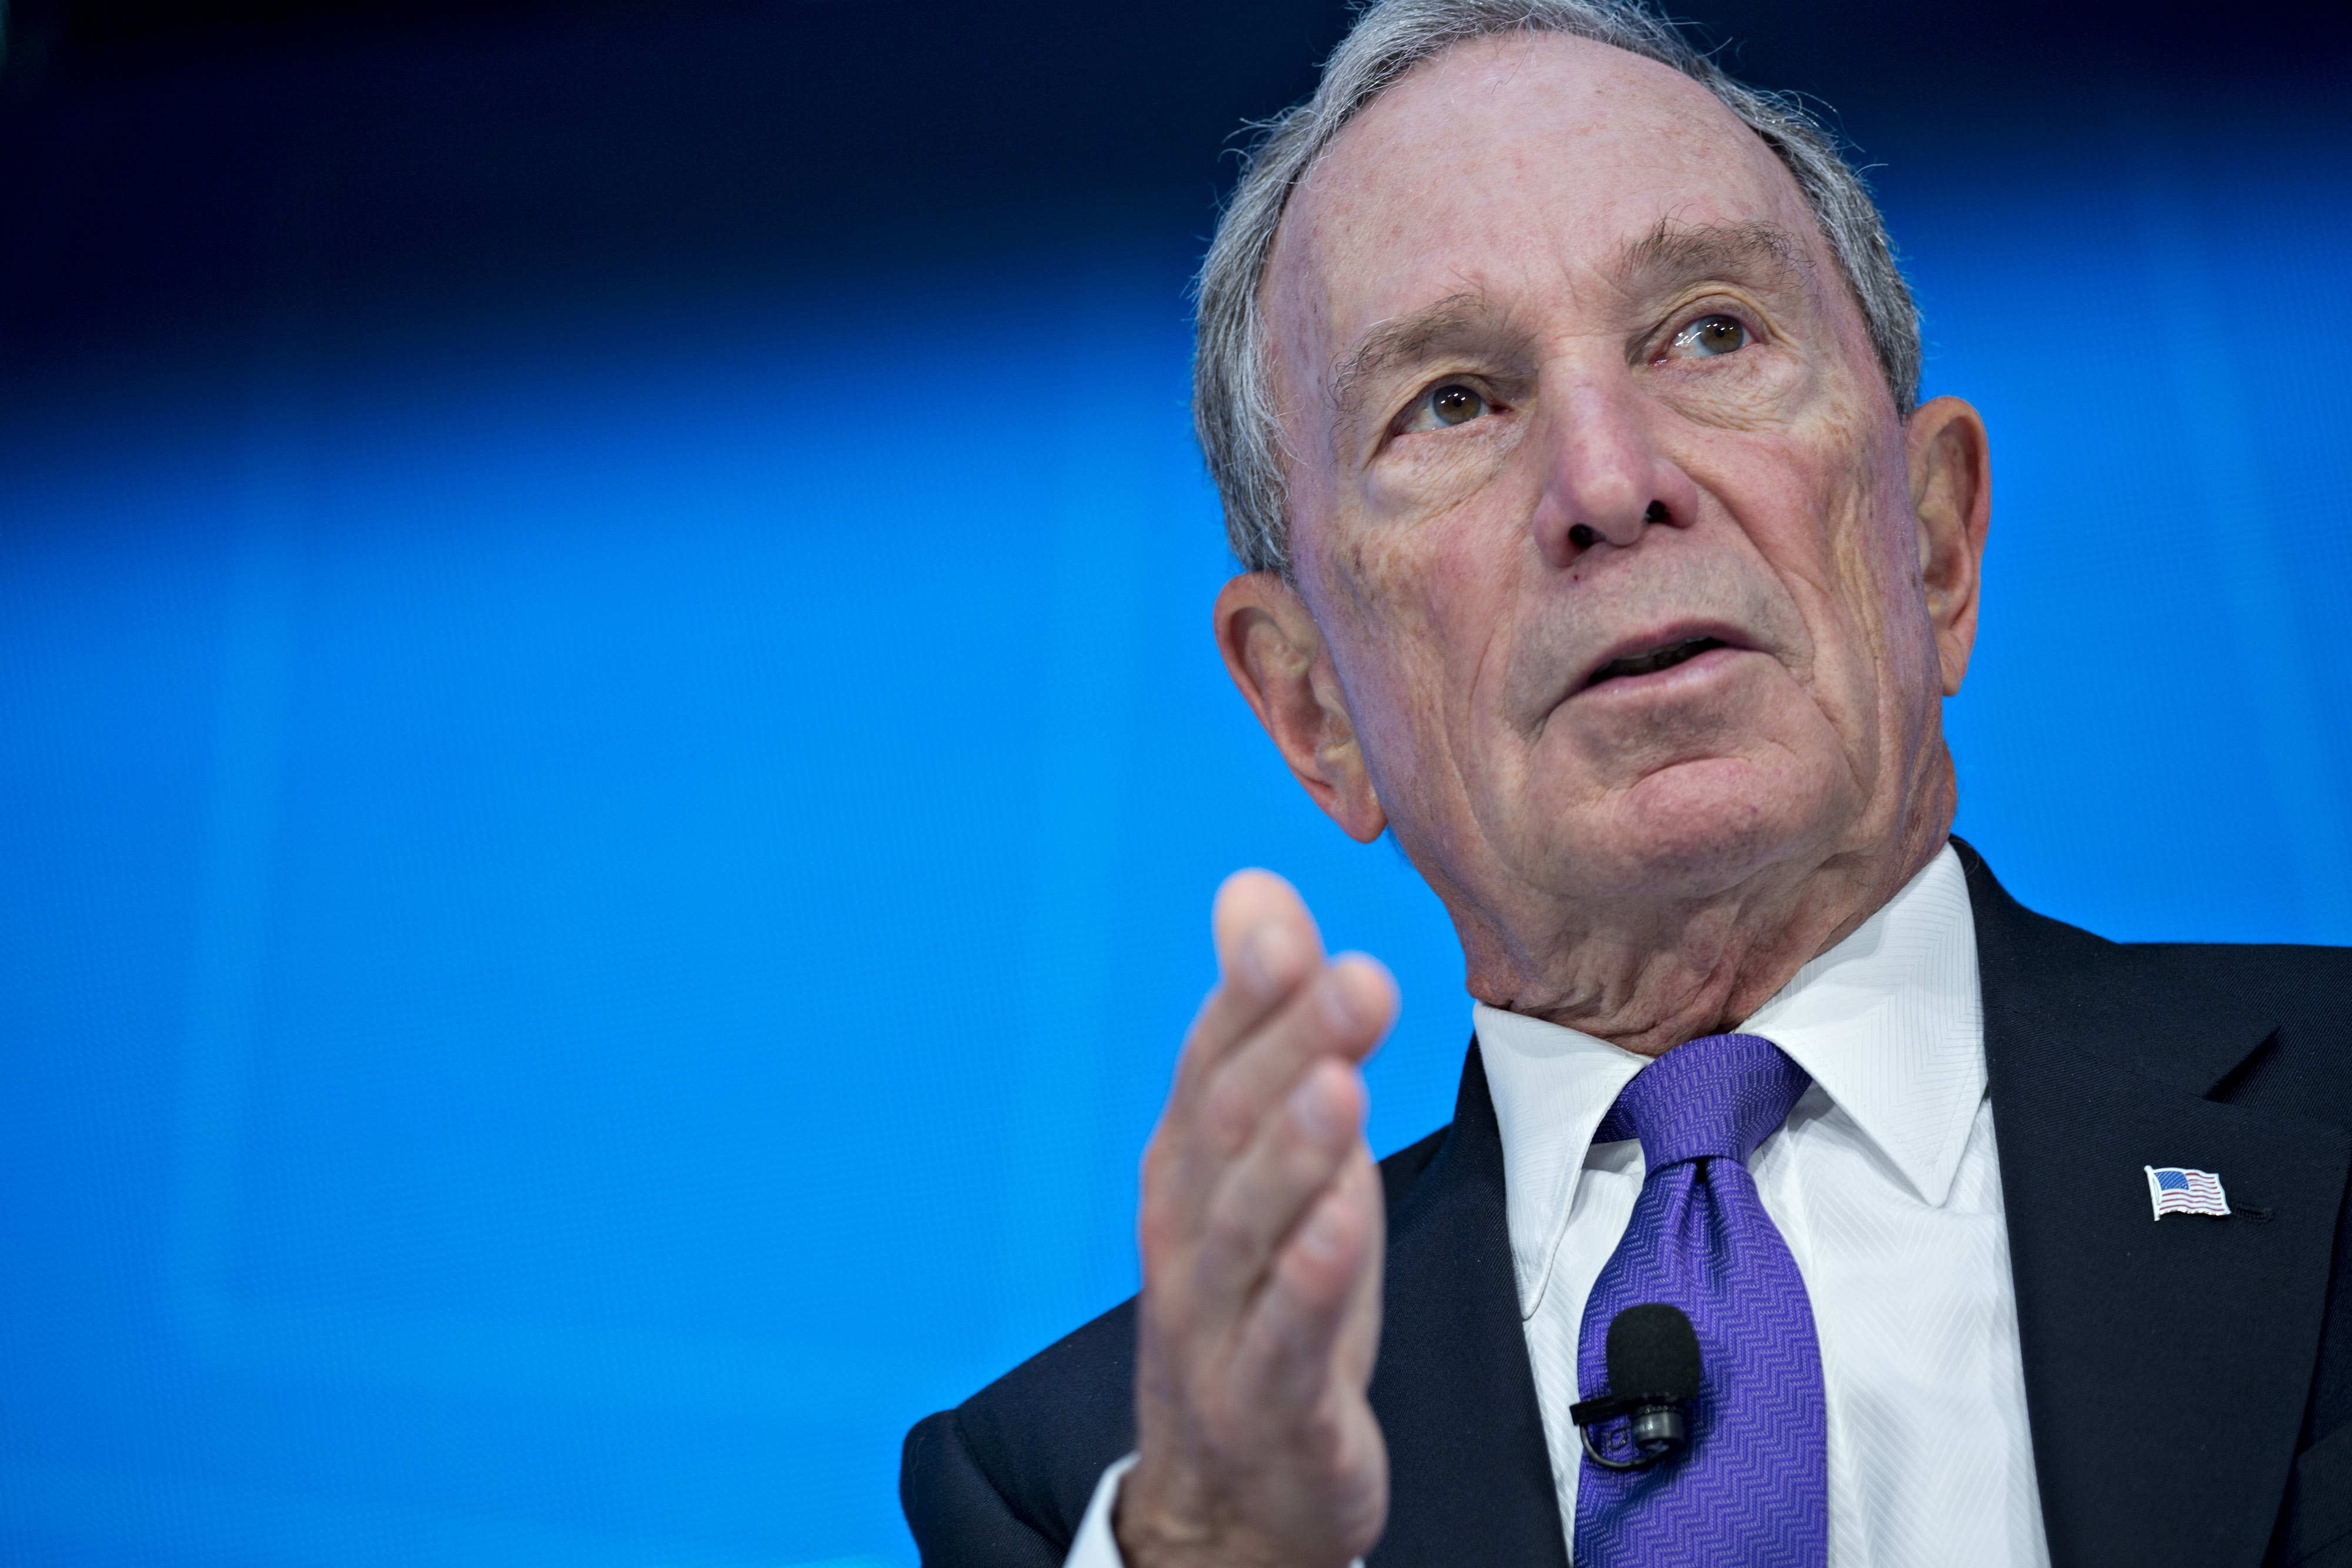 Michael Bloomberg in Washington, D.C. on April 19, 2018. (Andrew Harrer—Bloomberg/Getty Images)